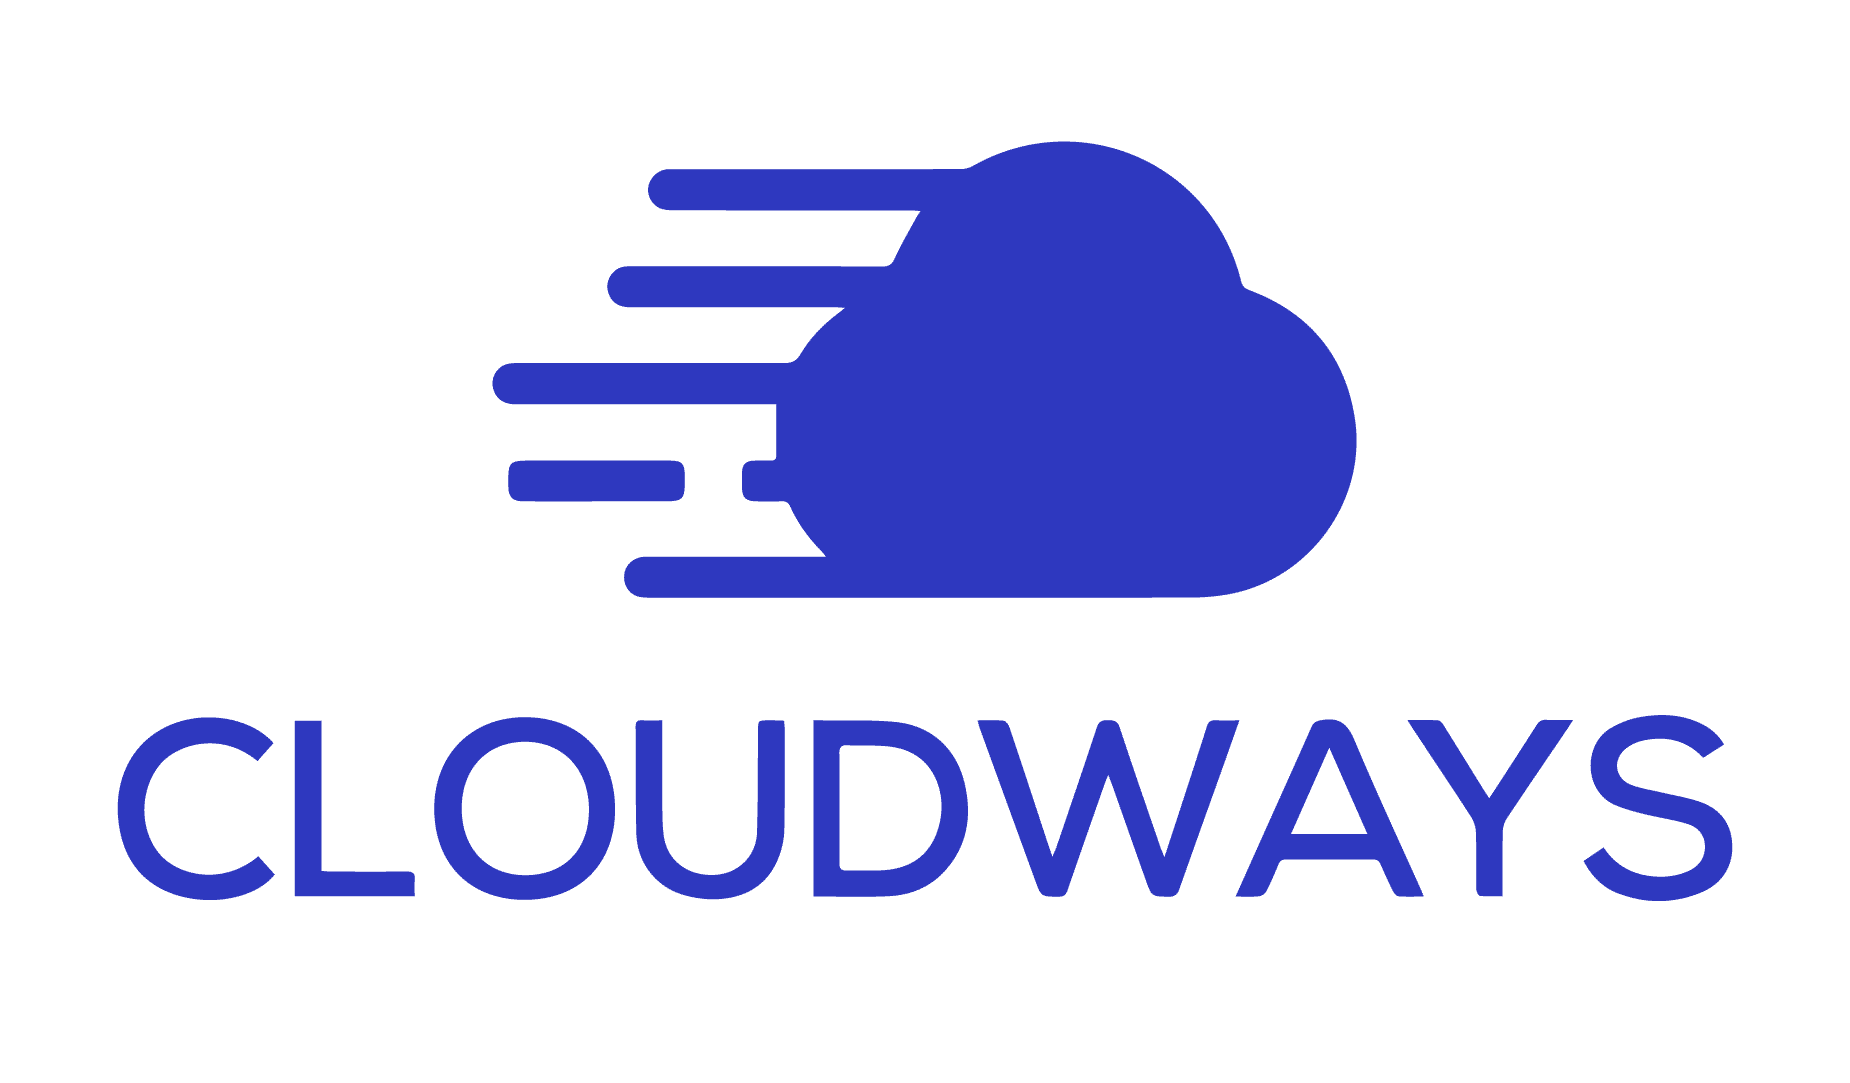 Cloudways logo: blue cloud with stripes coming off it on the left underneath in blue letters: Cloudways